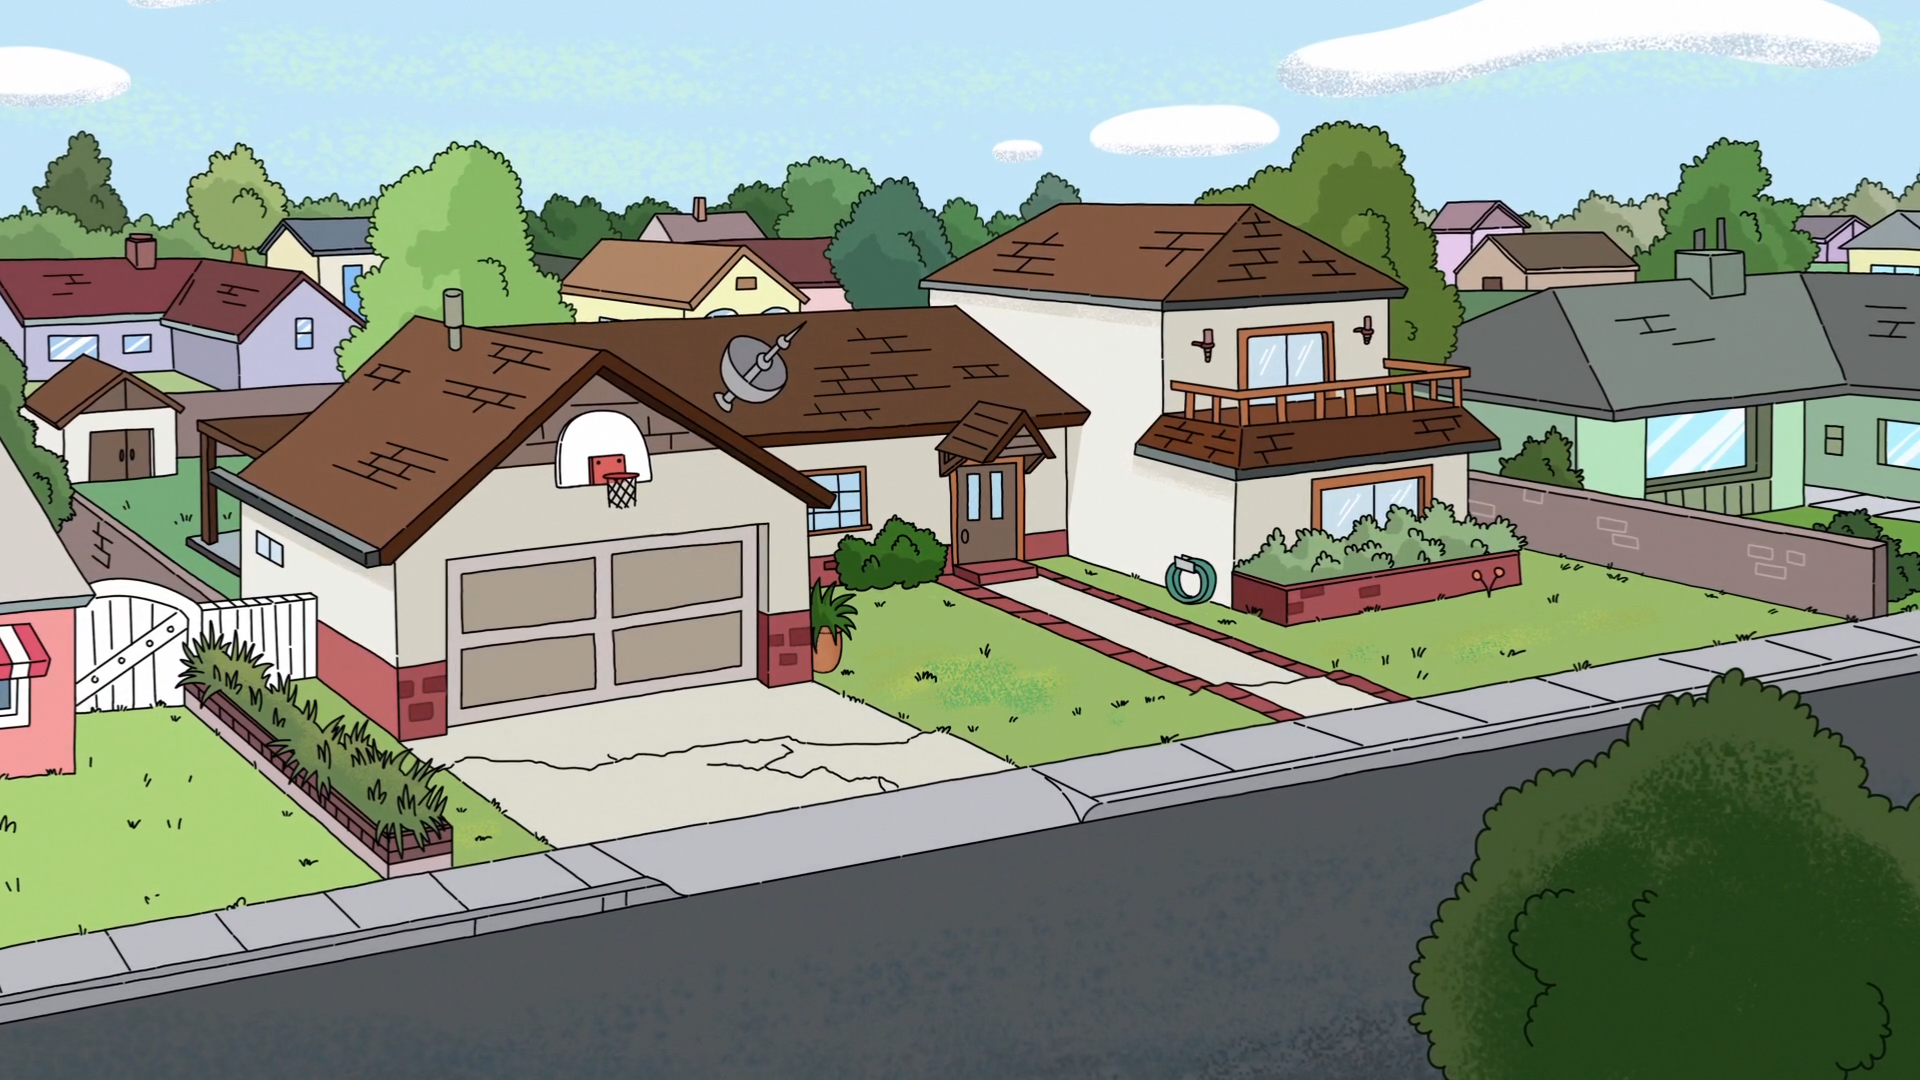 General 1920x1080 Rick and Morty Adult Swim cartoon house TV series